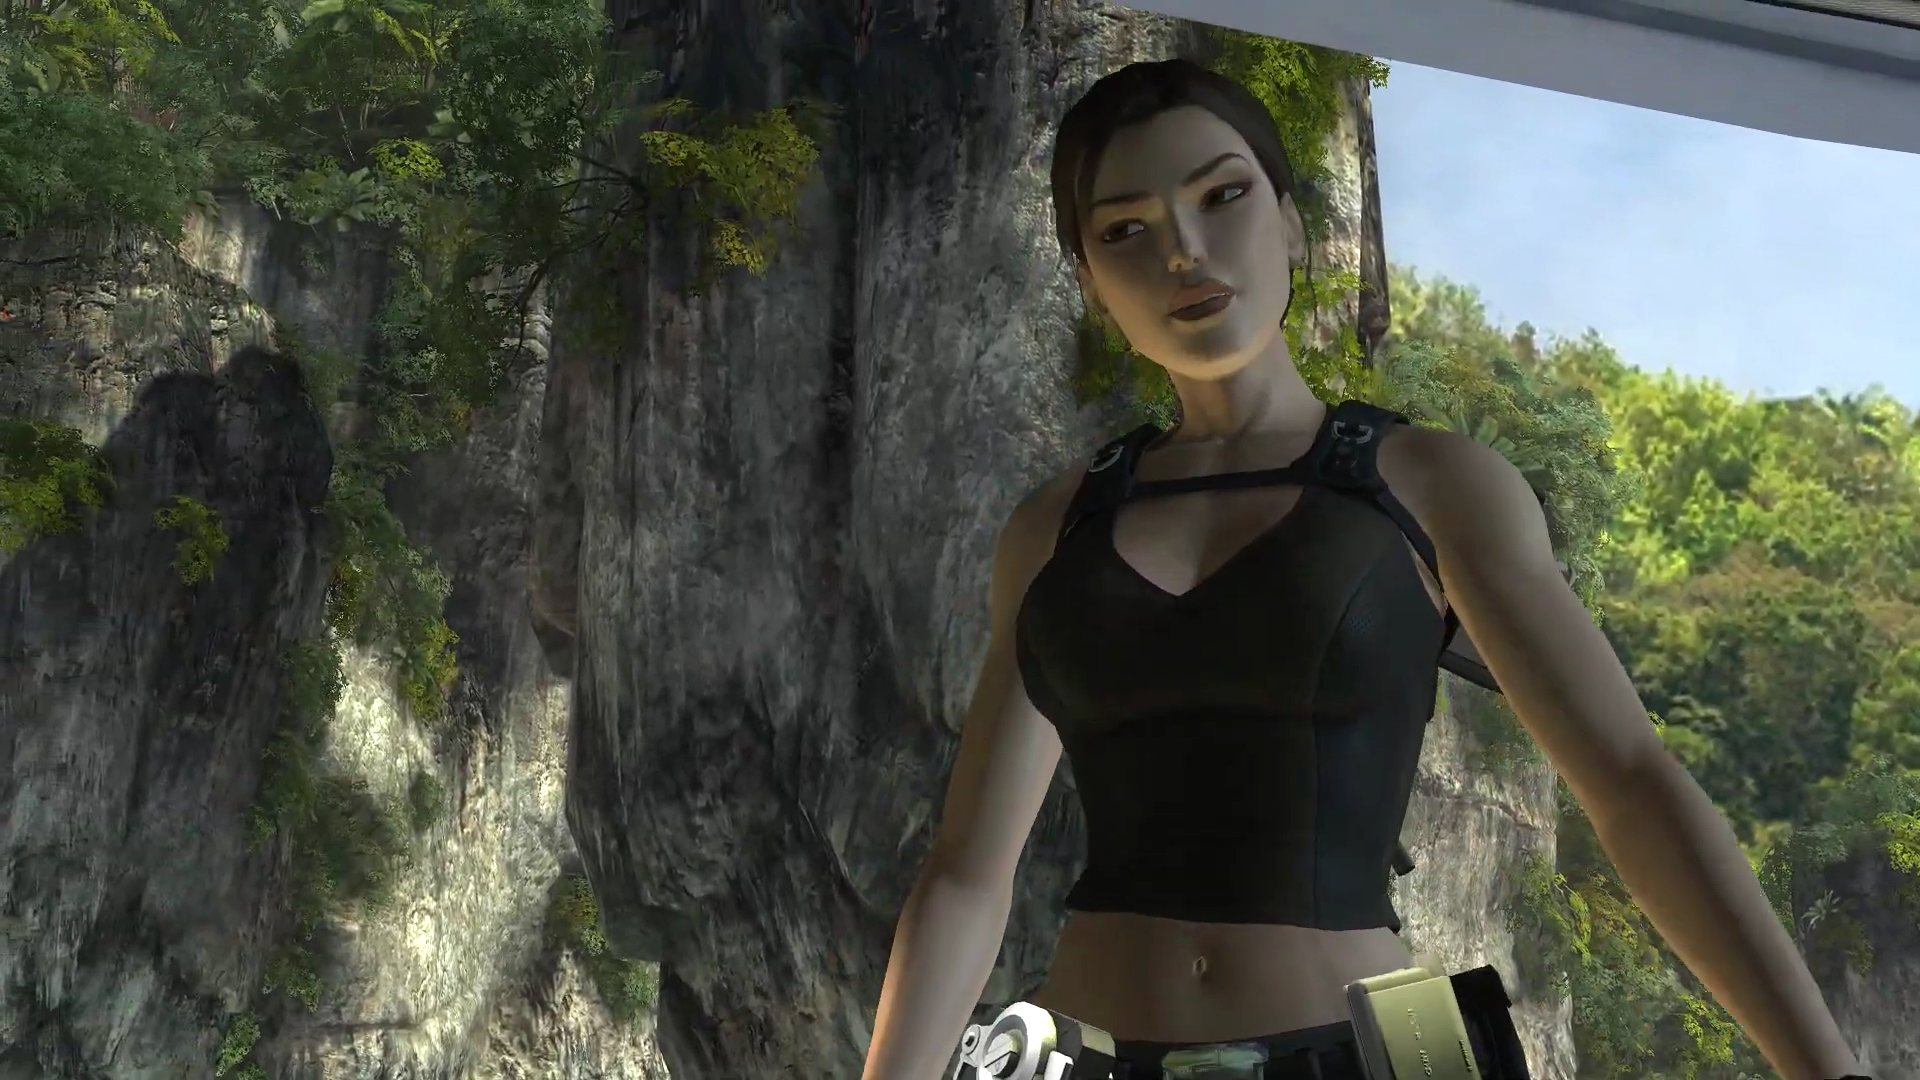 Media asset in full size related to 3dfxzone.it news item entitled as follows: YouTube Gameplay: Tomb Raider: Underworld | 1080p | 8x anti-aliasing & 16x aniso | Image Name: news34496_Tomb-Raider-Underworld_Screenshot_1.png